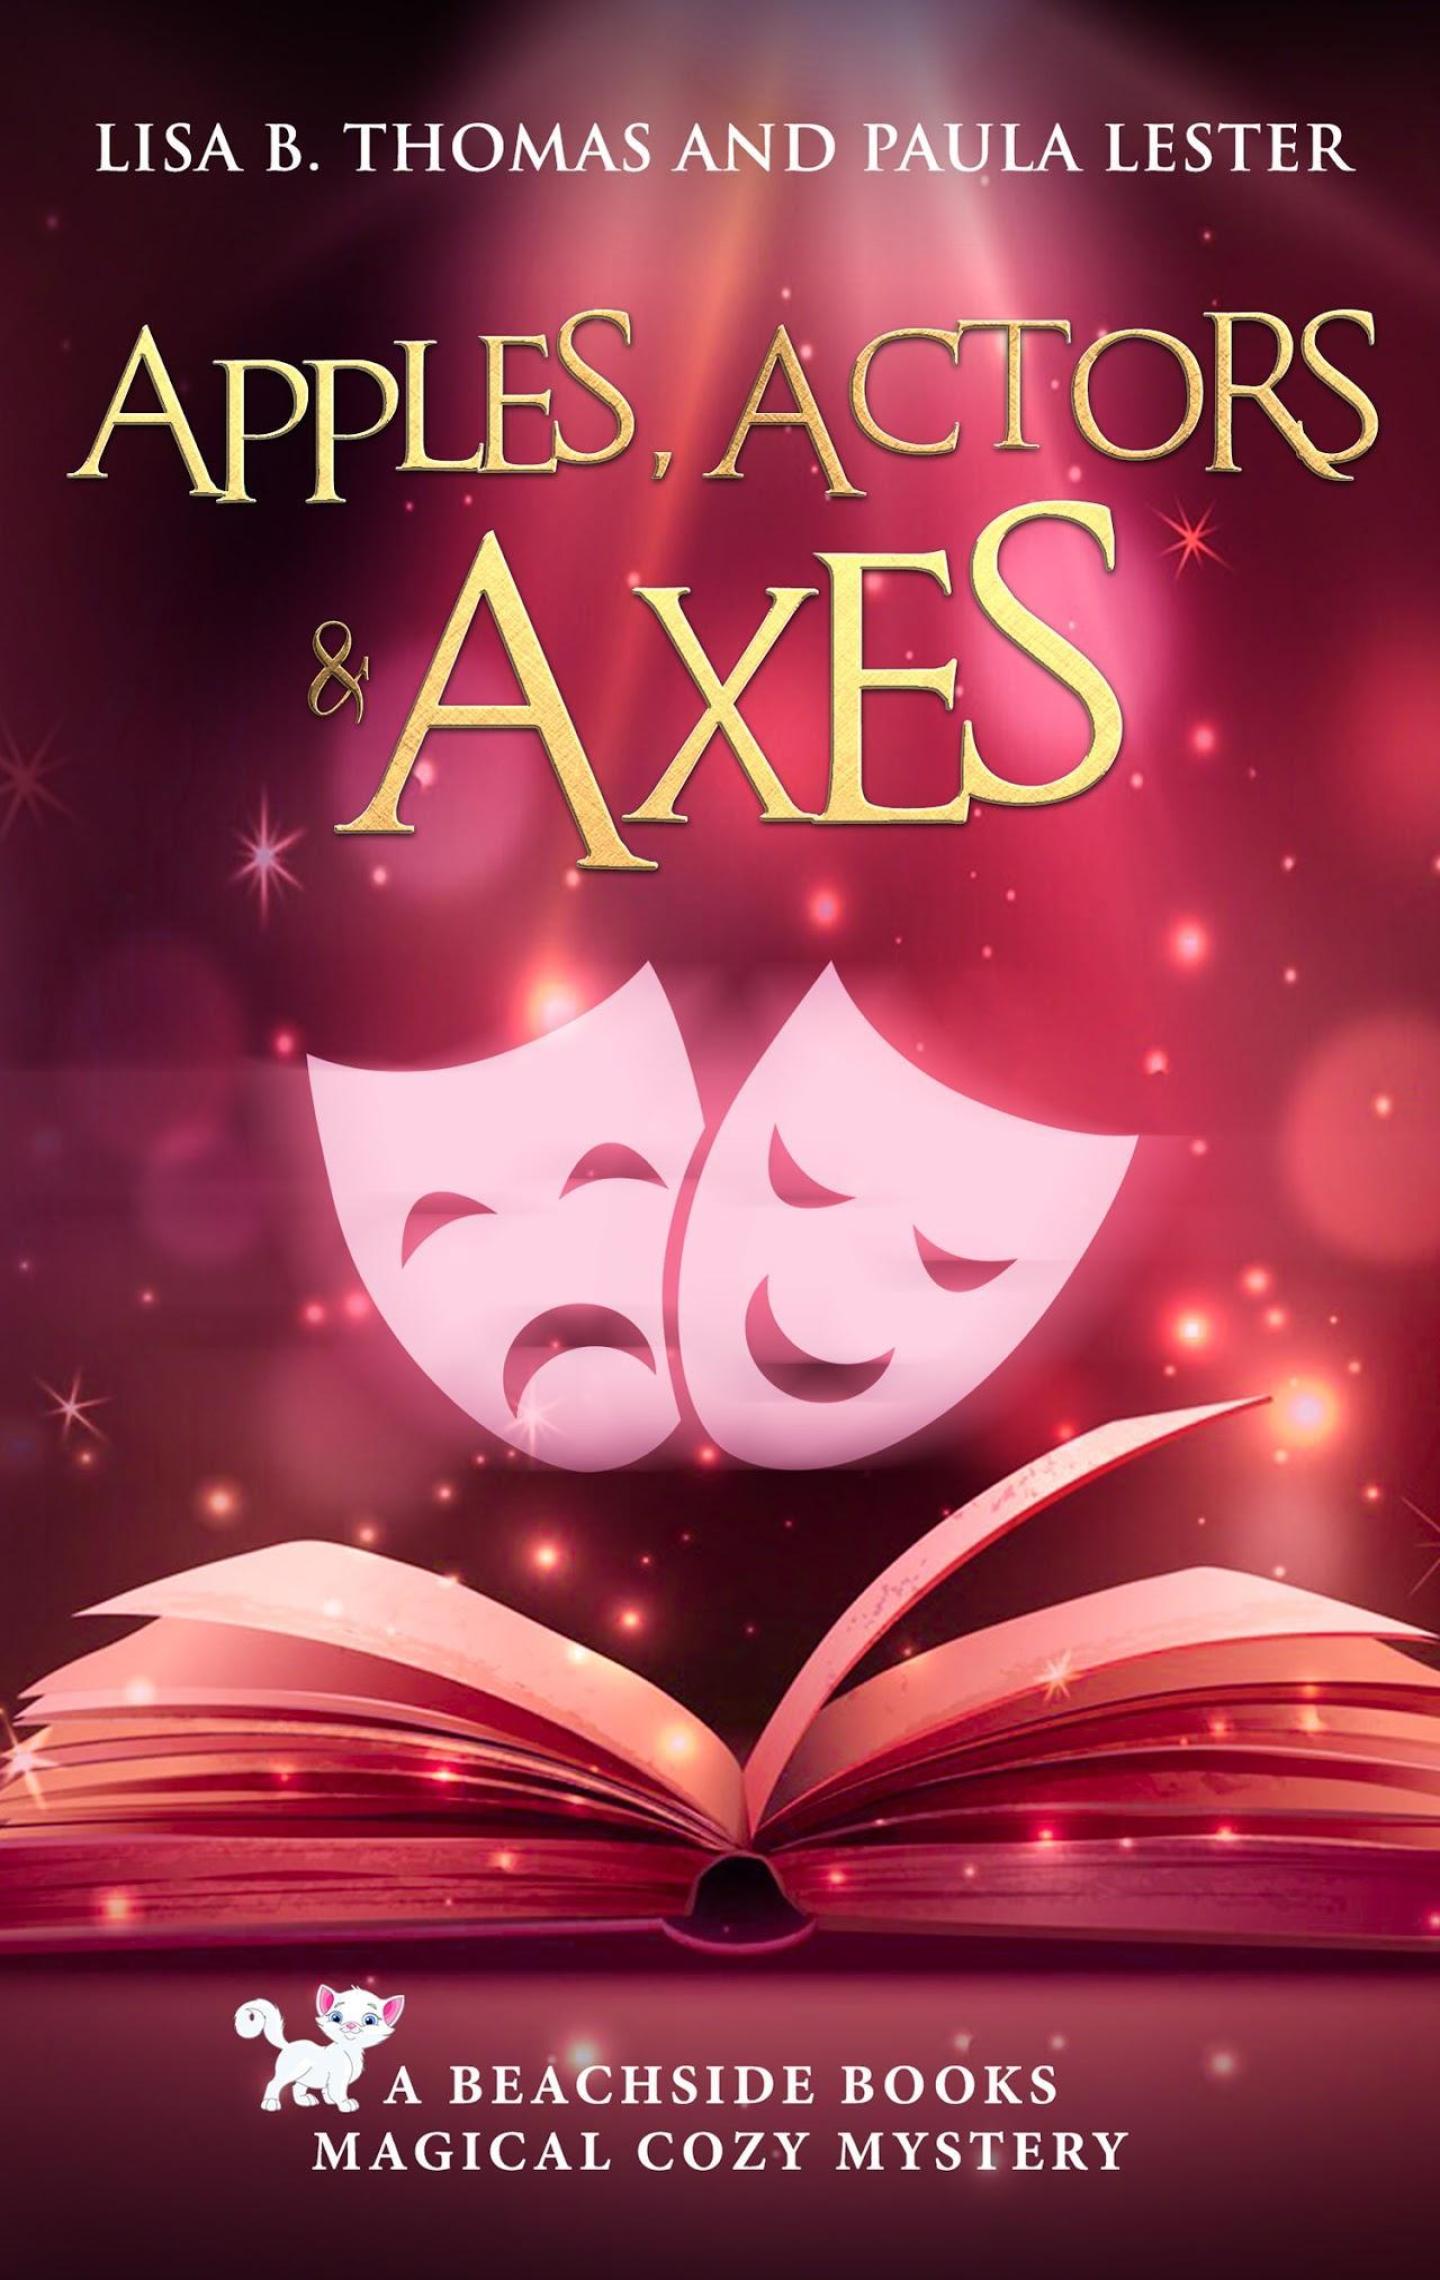 Apples, Actors and Axes